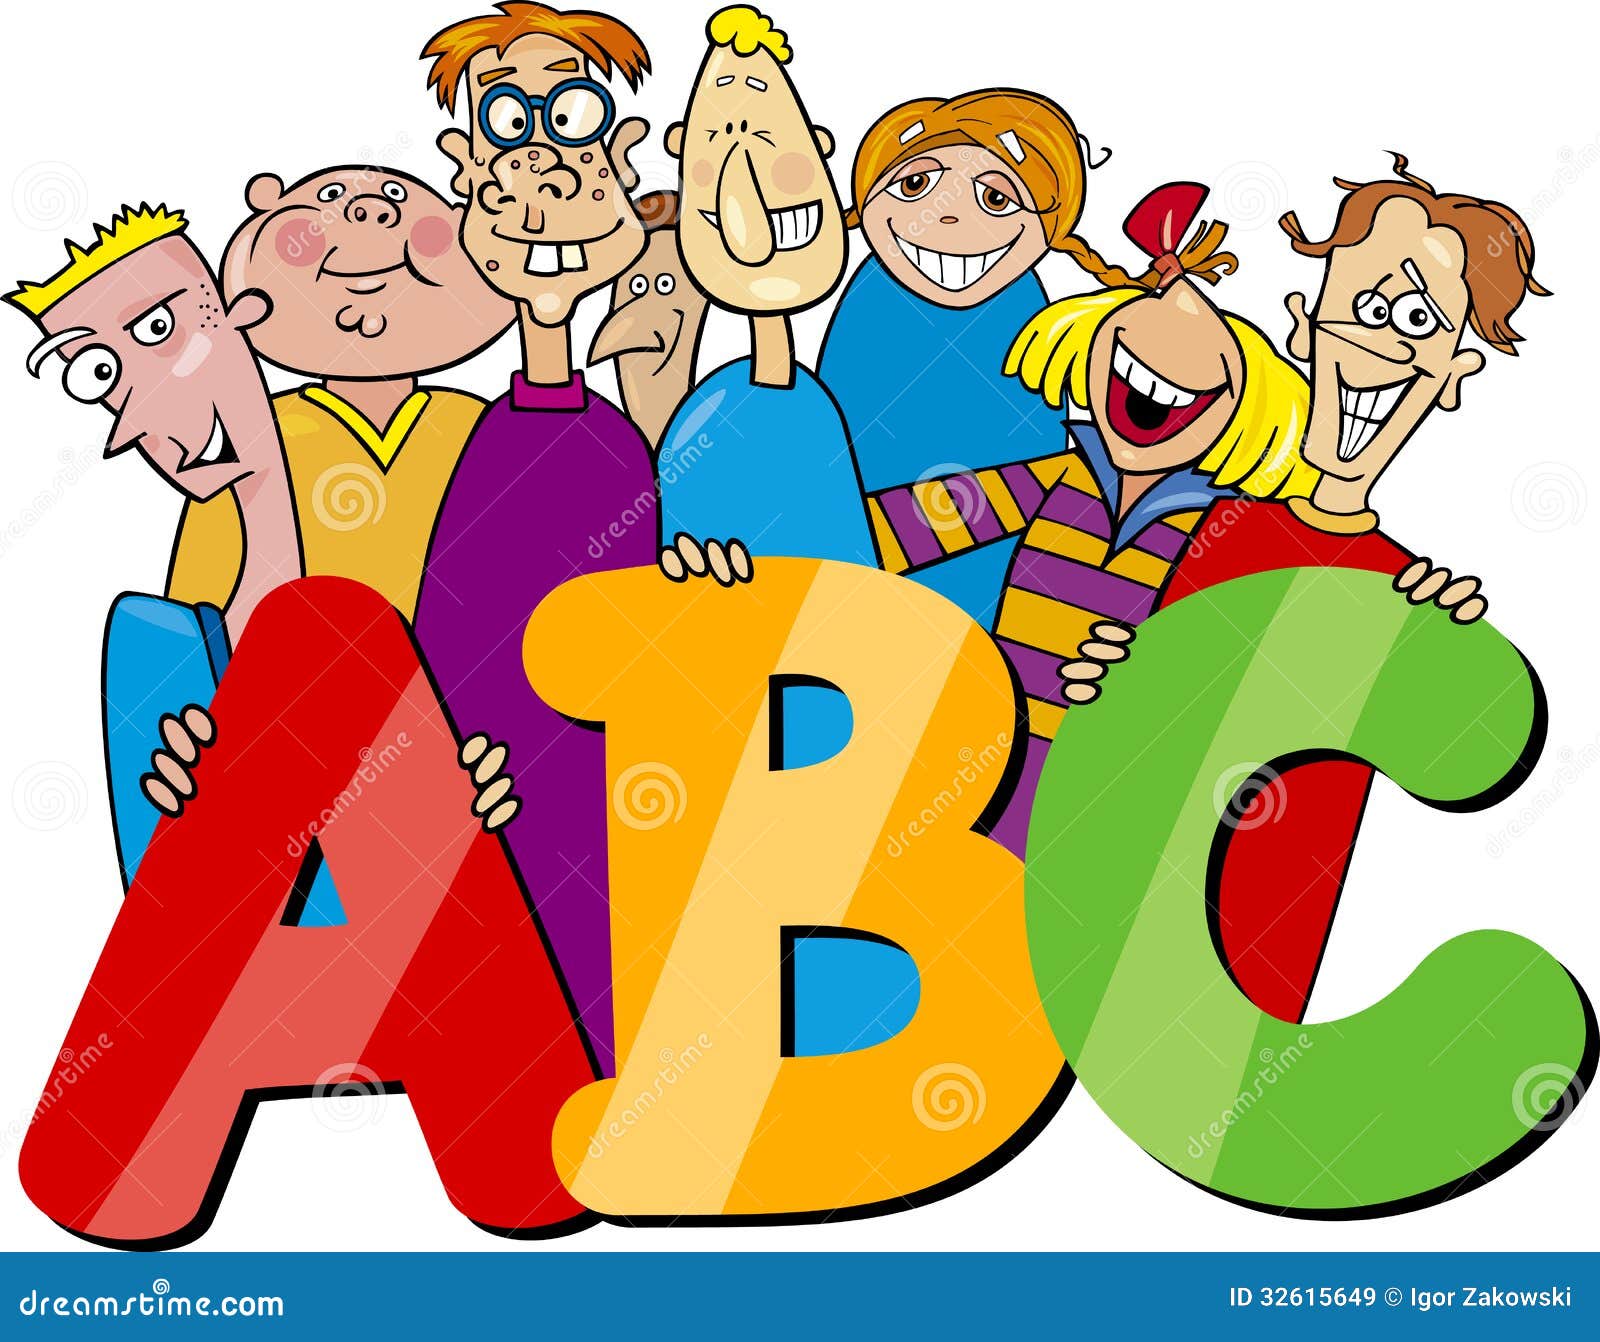 Kids With Abc Letters Cartoon Stock Vector - Illustration ...